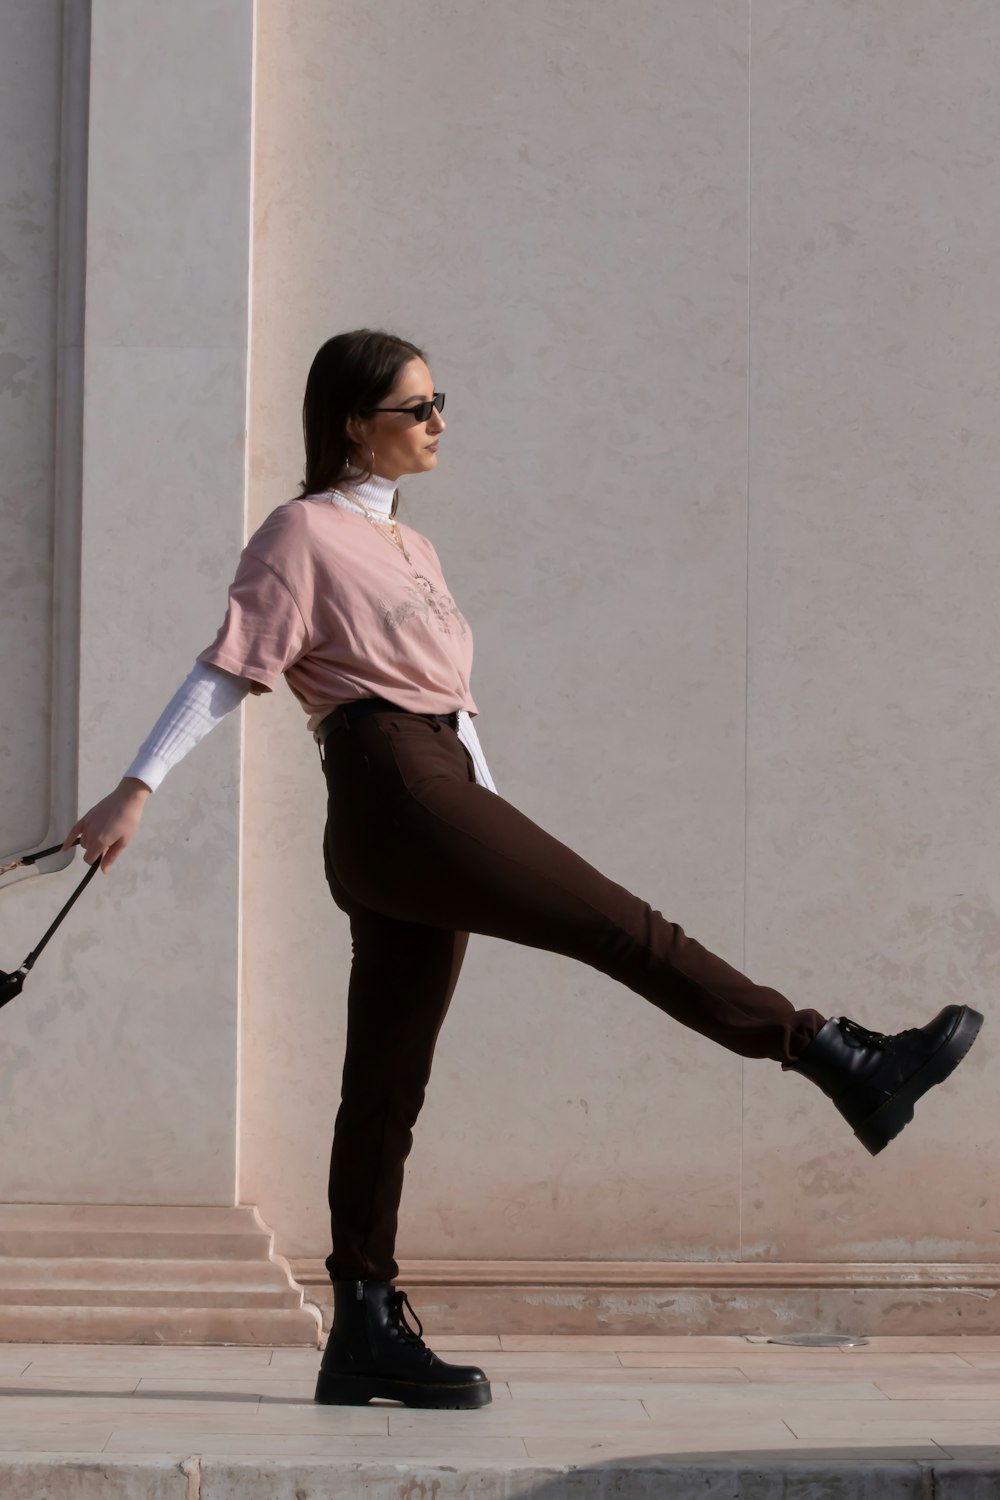 woman in pink shirt and black pants holding walking stick